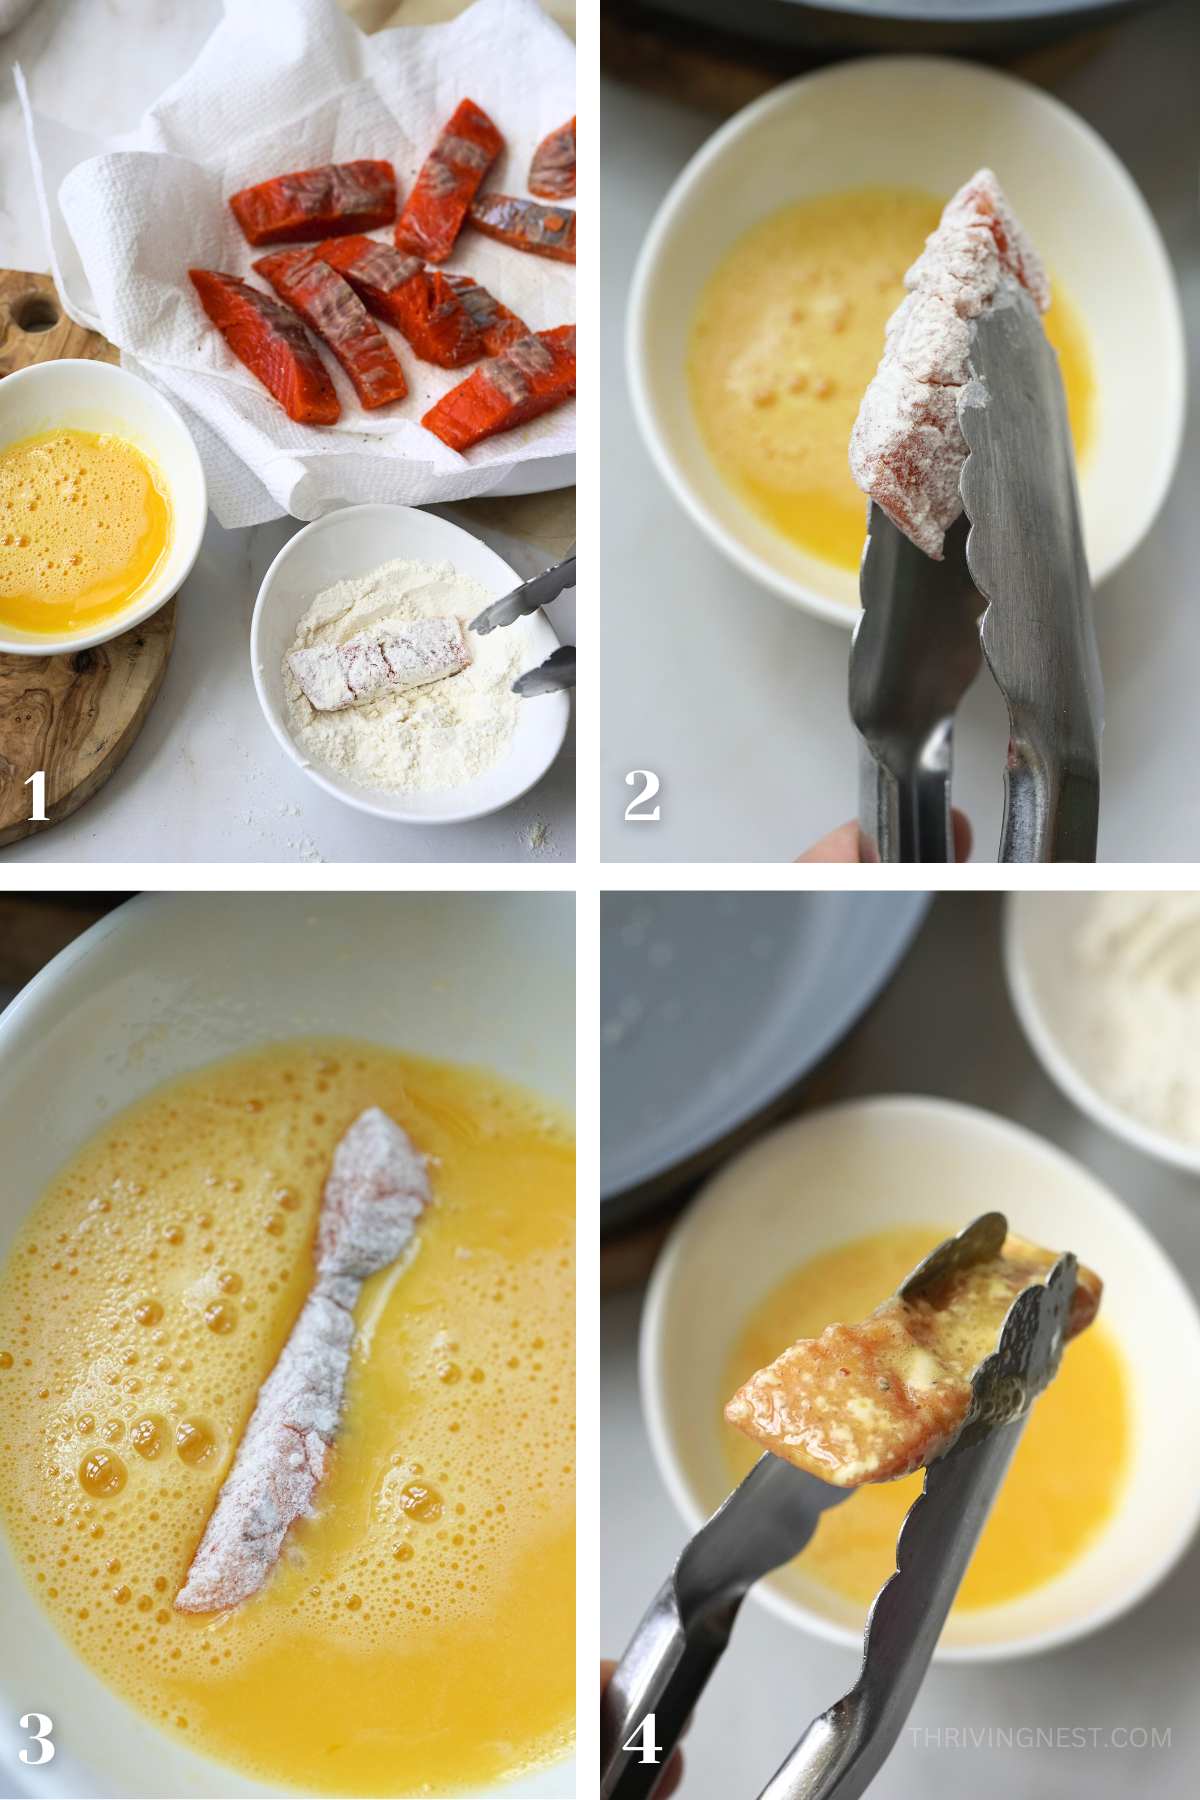 Process shots showing how to dredge salmon cuts in flour and egg before cooking.